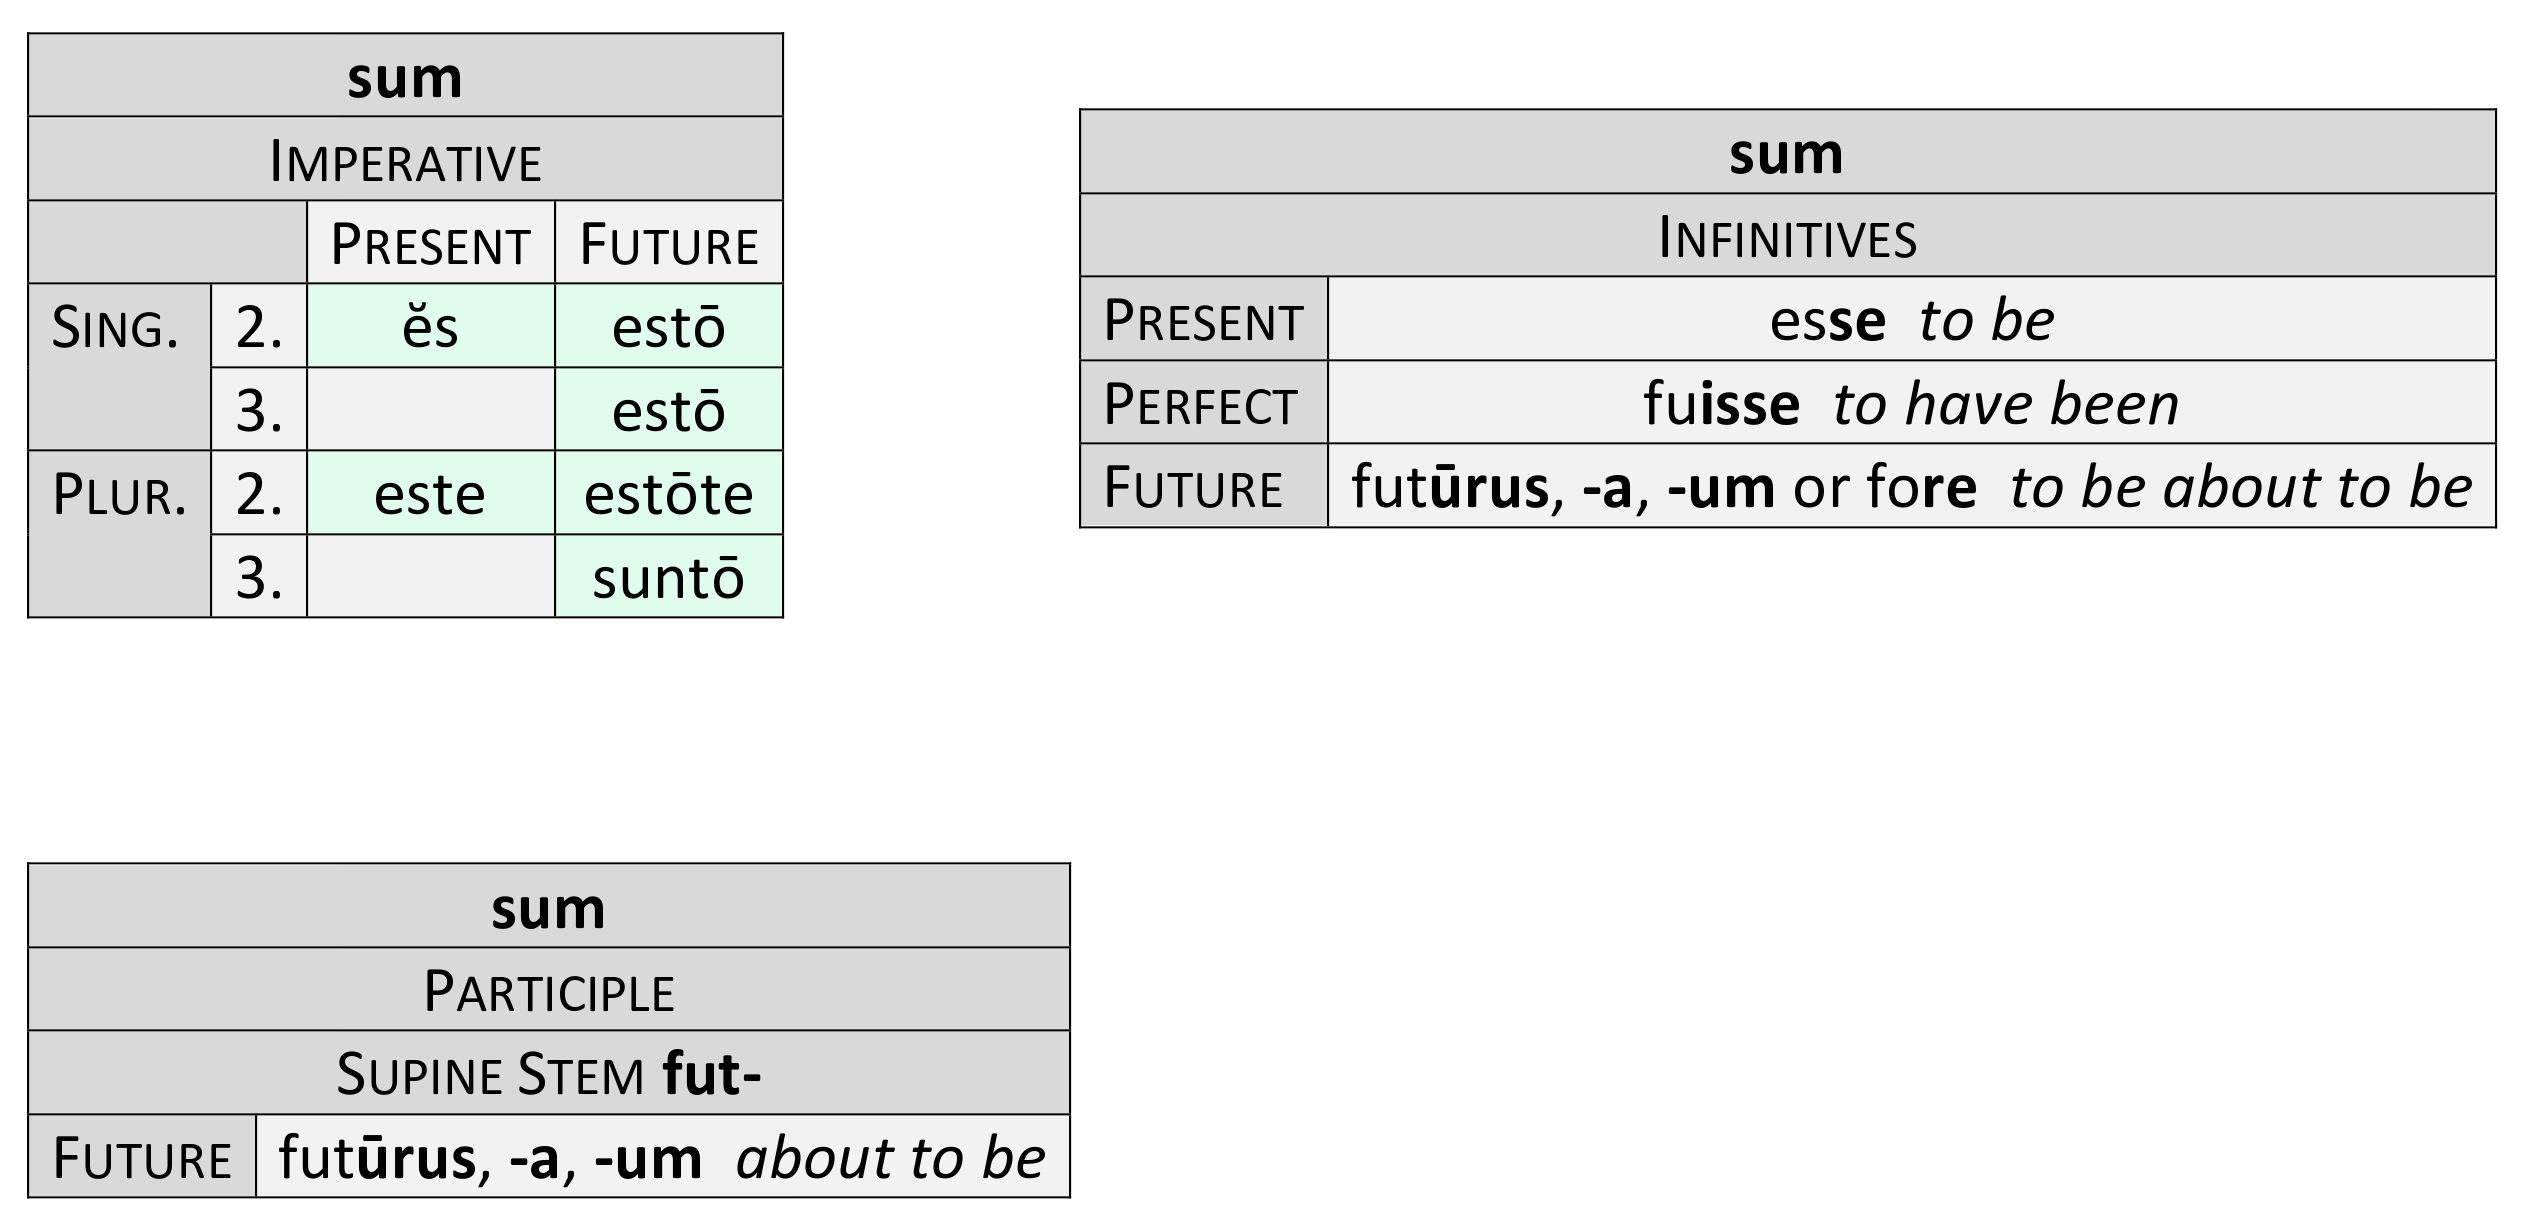 Imperatives, infinitives and participles of sum